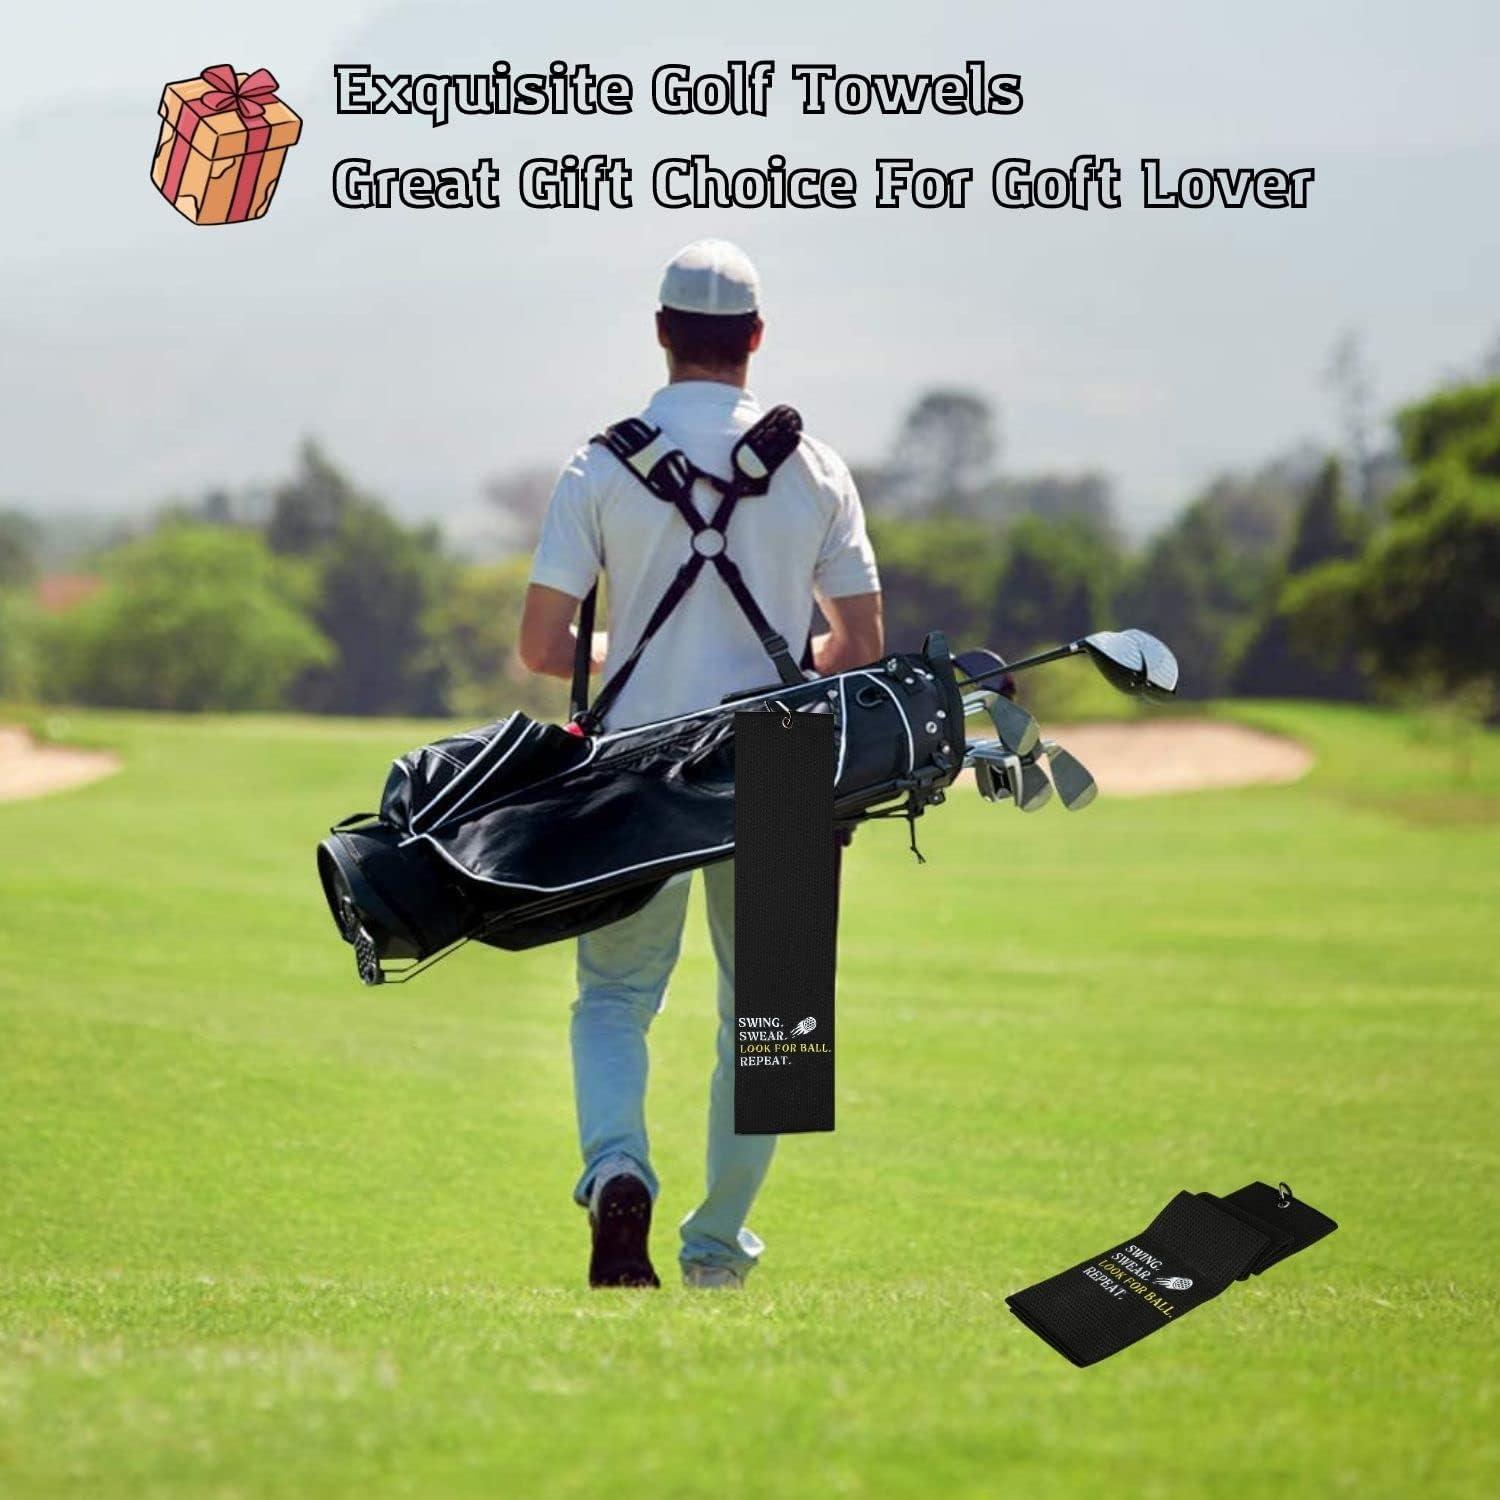 Funny Golf Gifts  Golf Gifts From The Gods - Unique Gifts For Golfers